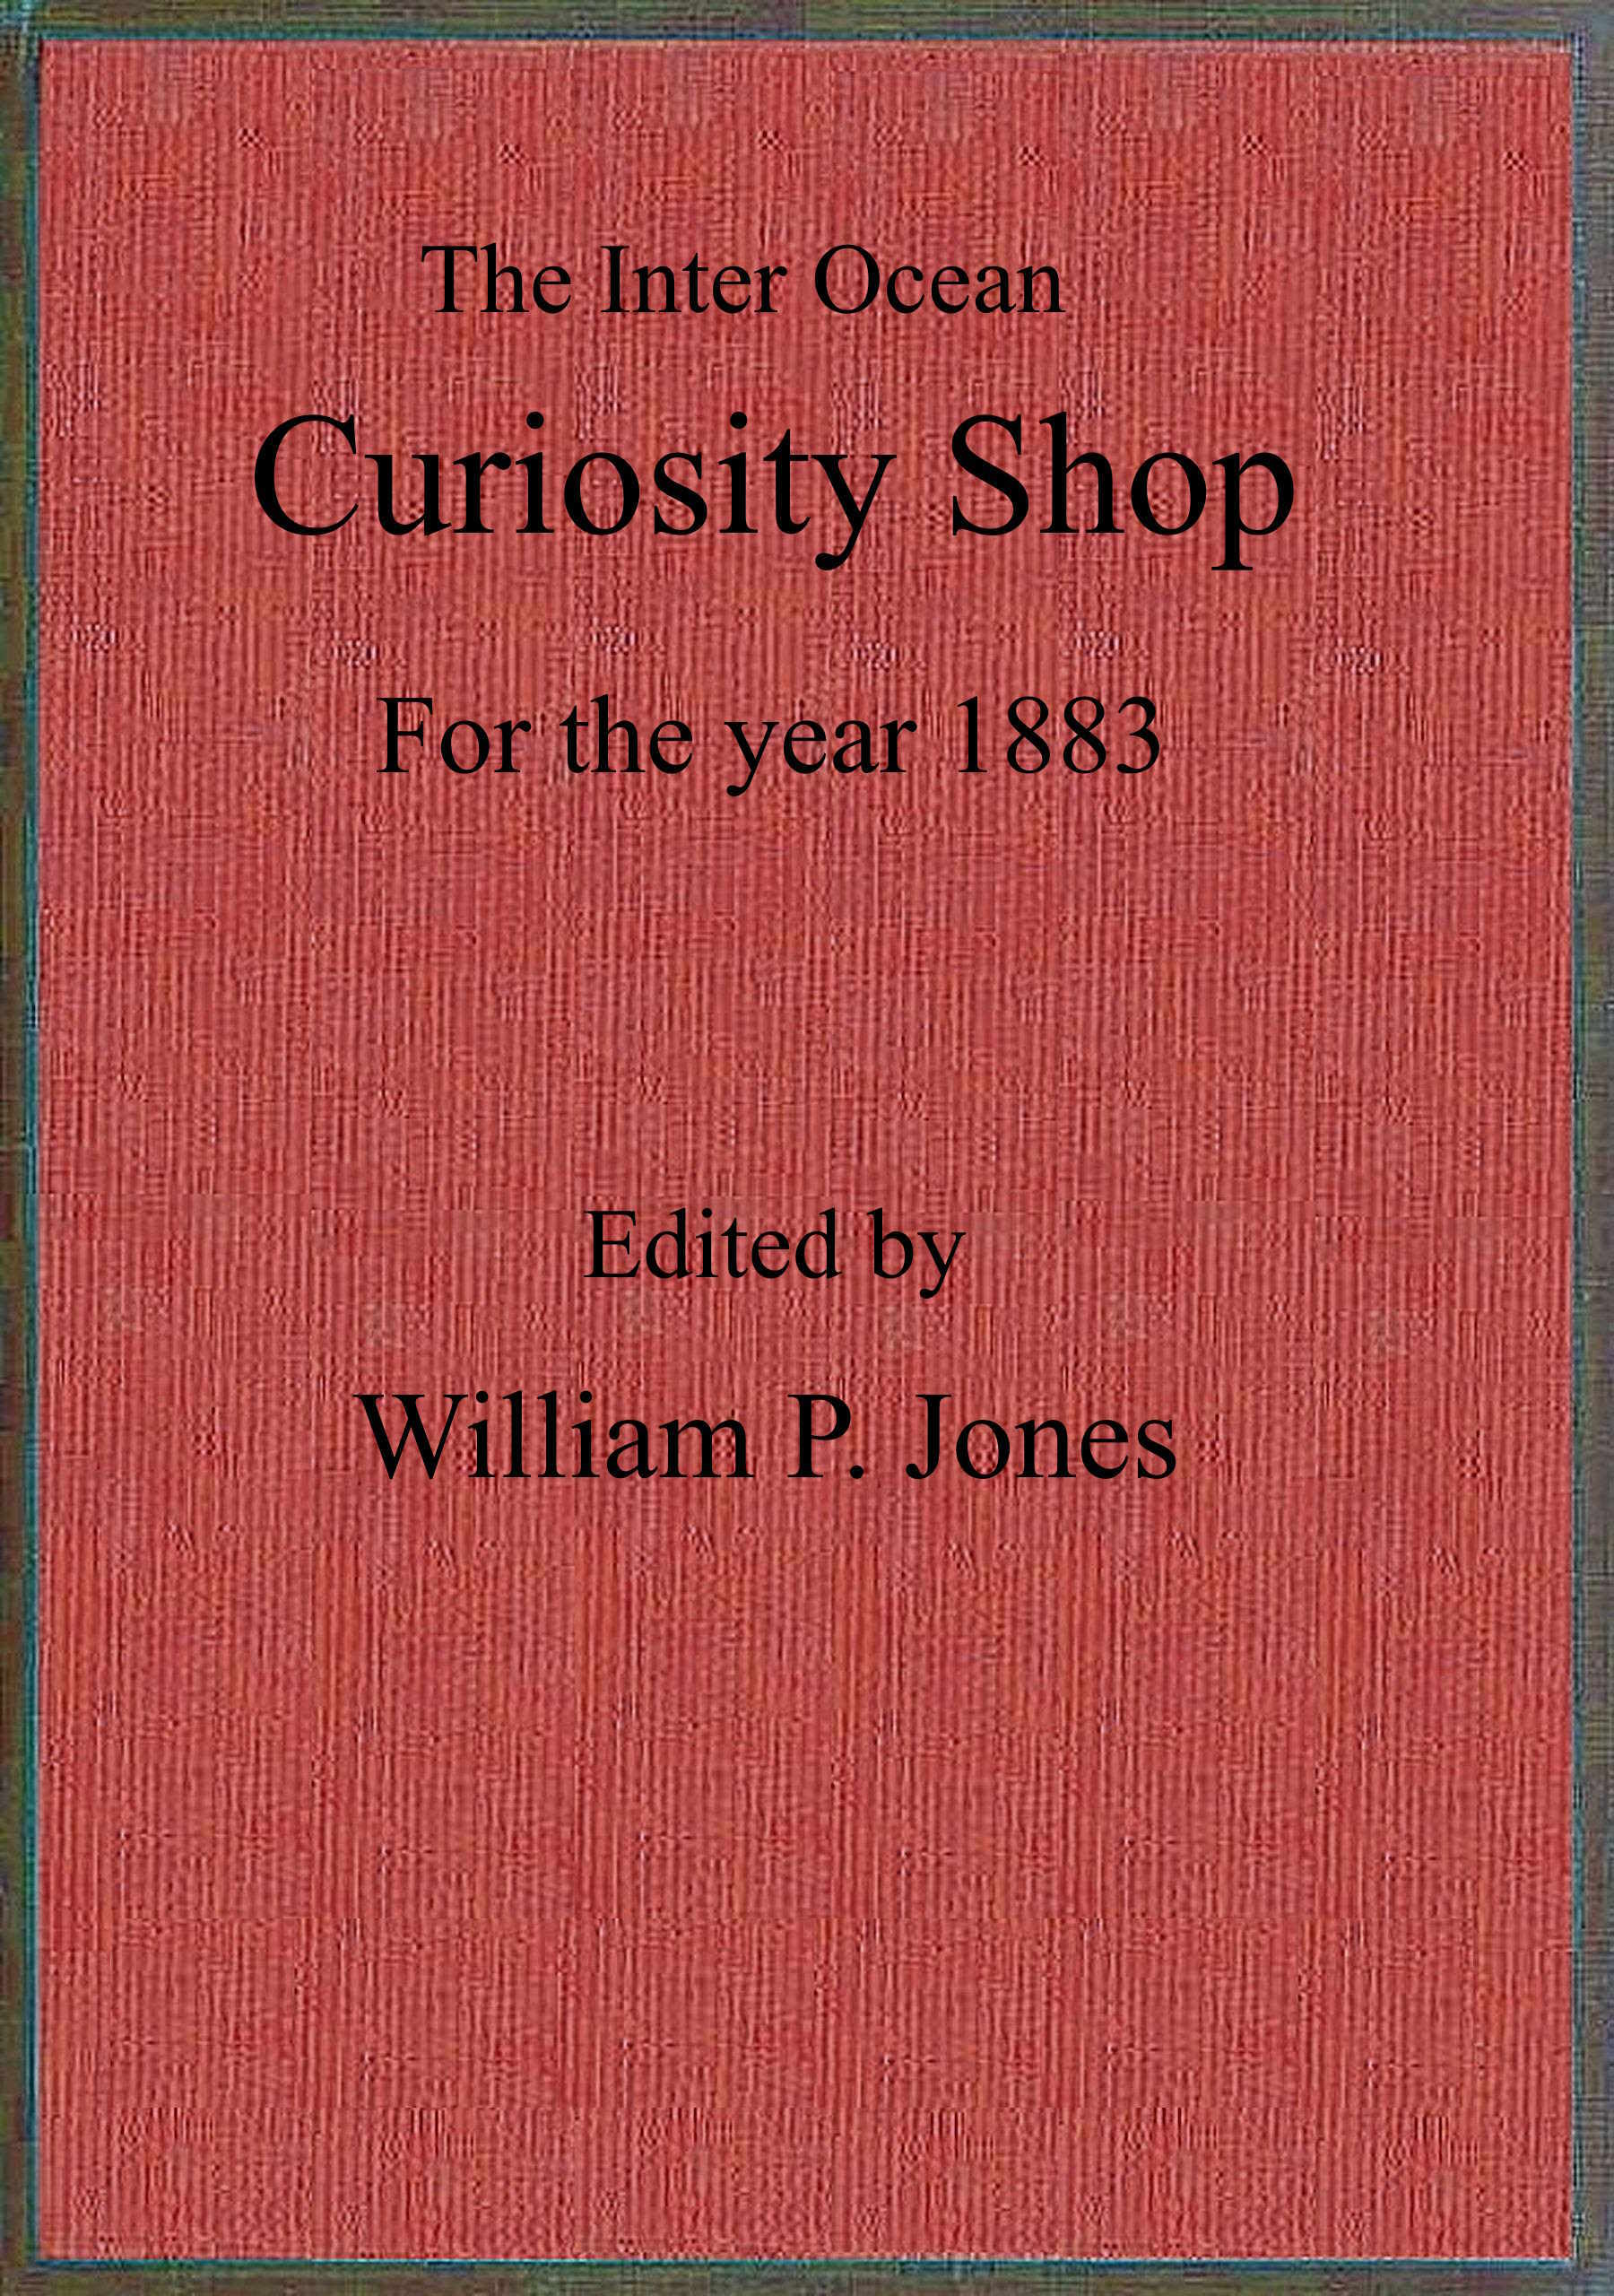 The Inter Ocean Curiosity Shop for the Year 1883 Project Gutenberg